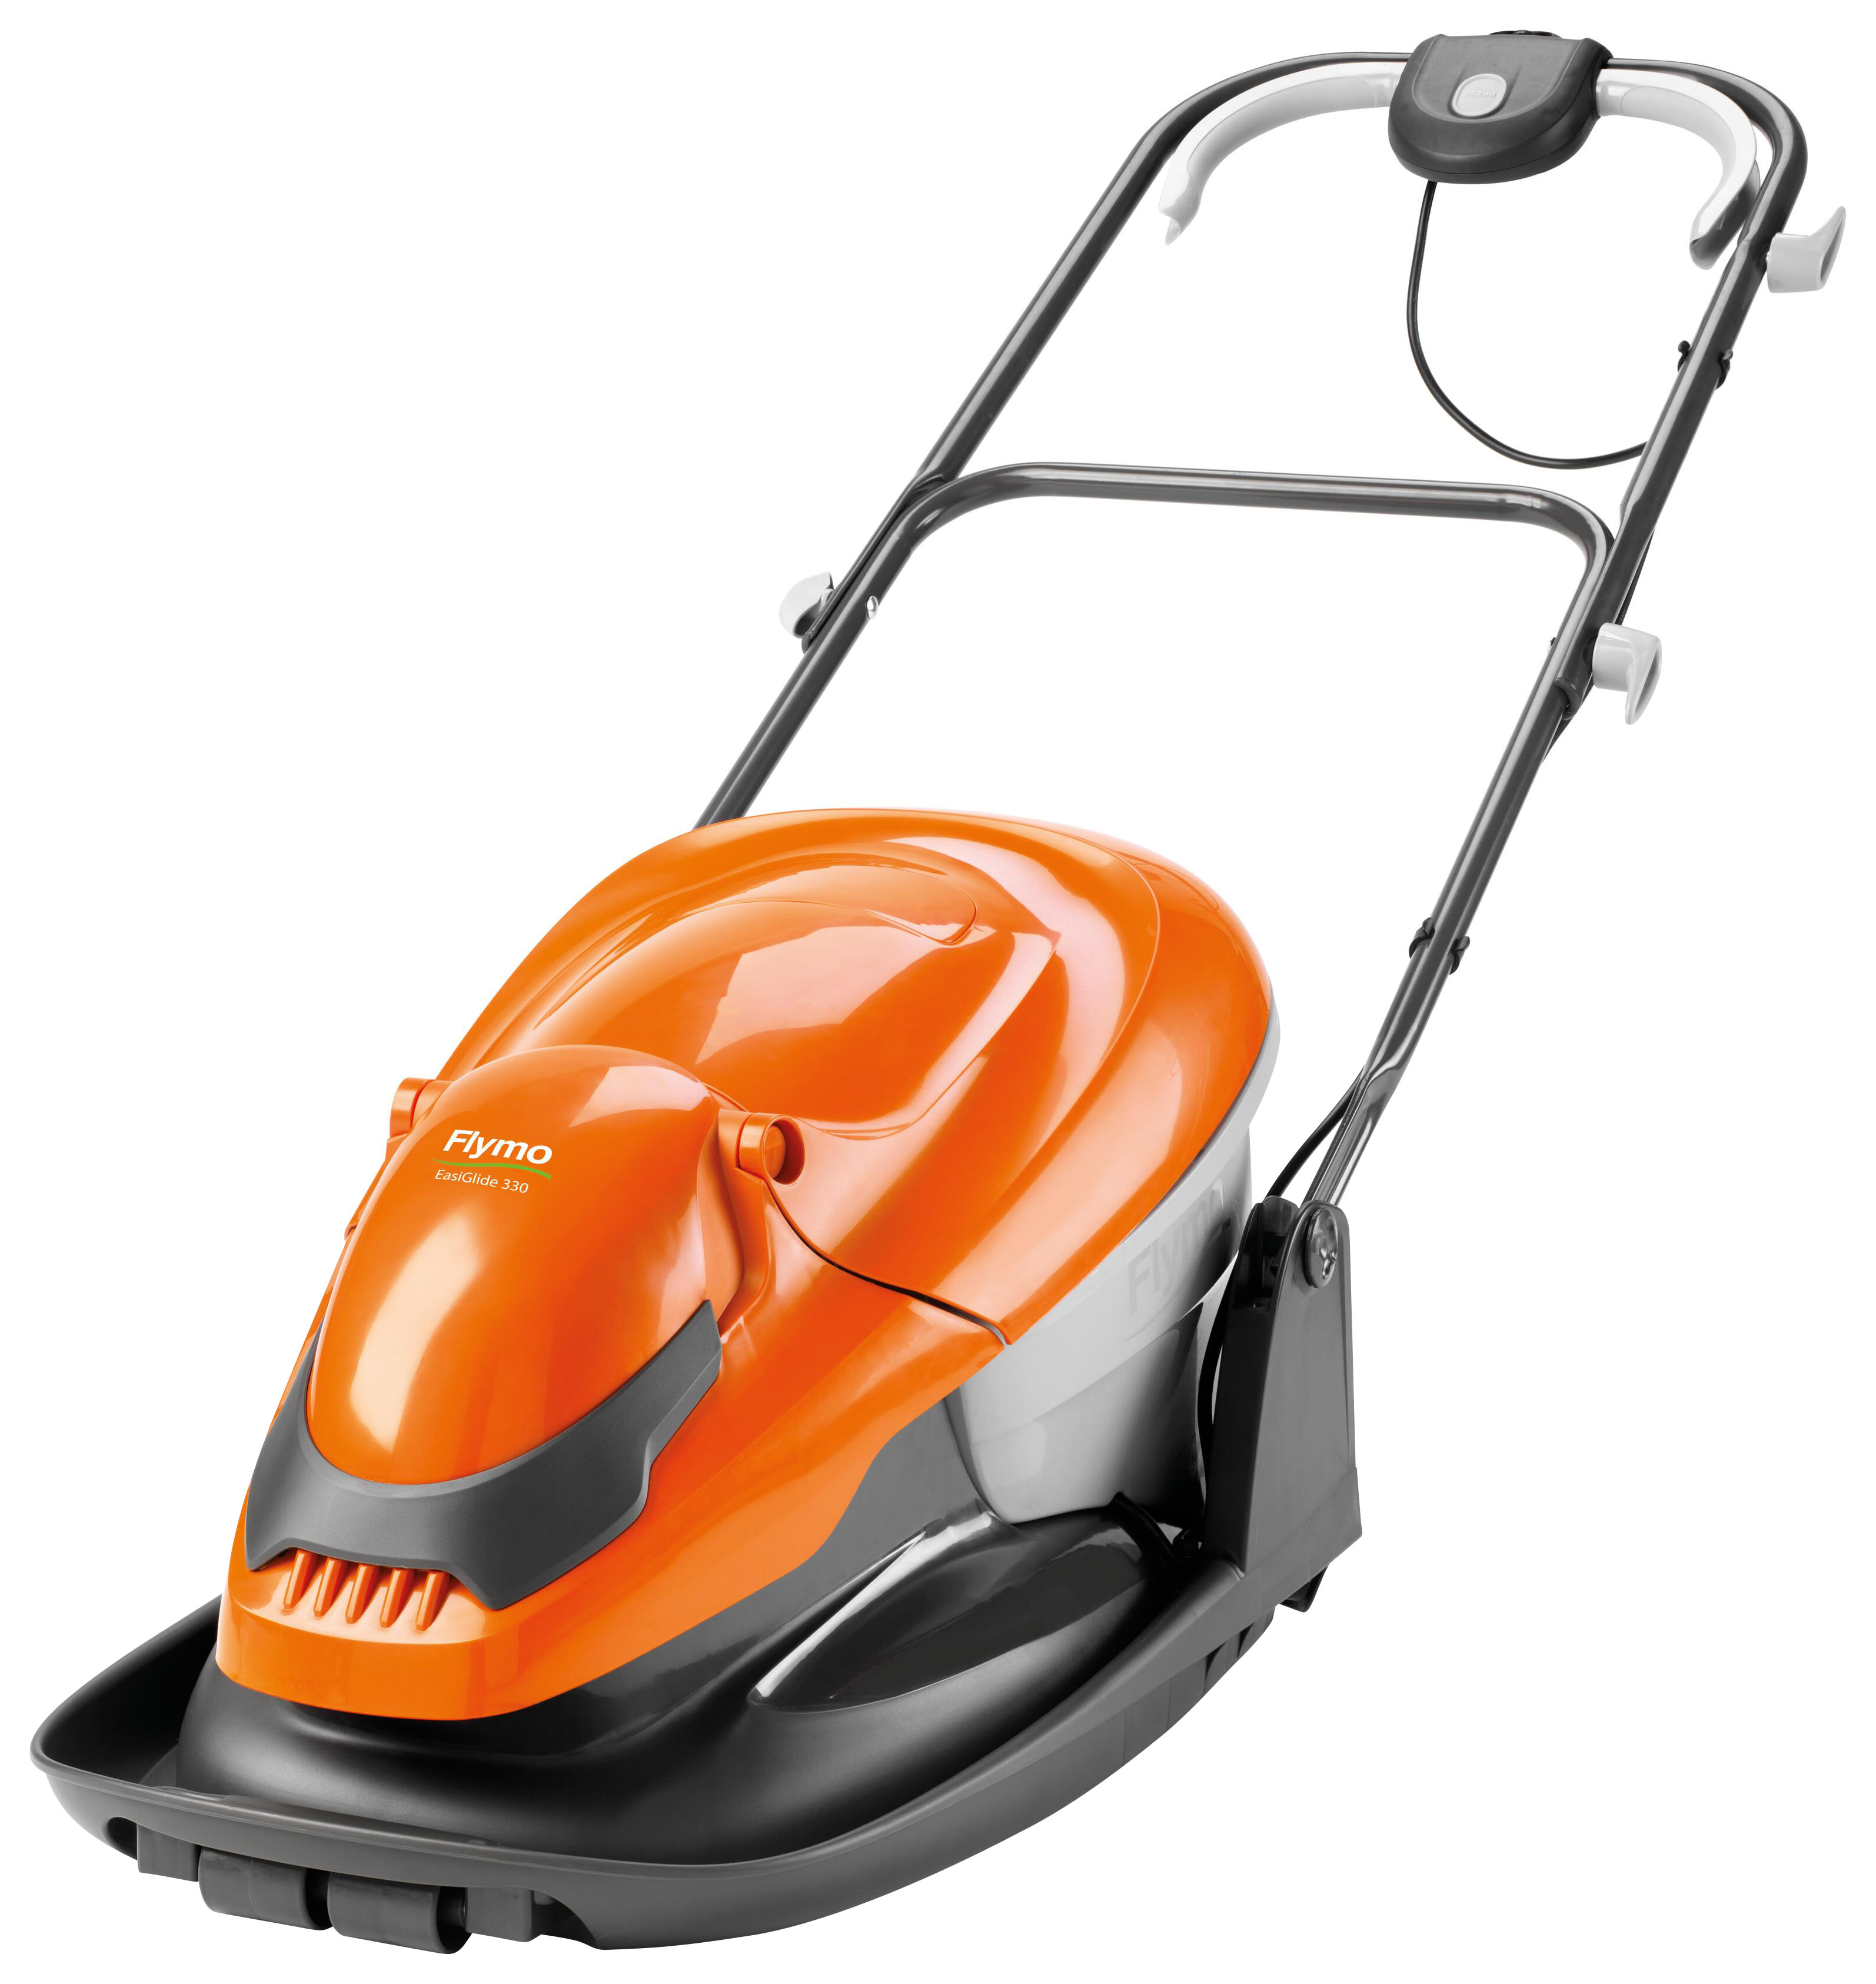 Flymo Easi Glide 330 Corded Hover Collect Lawnmower